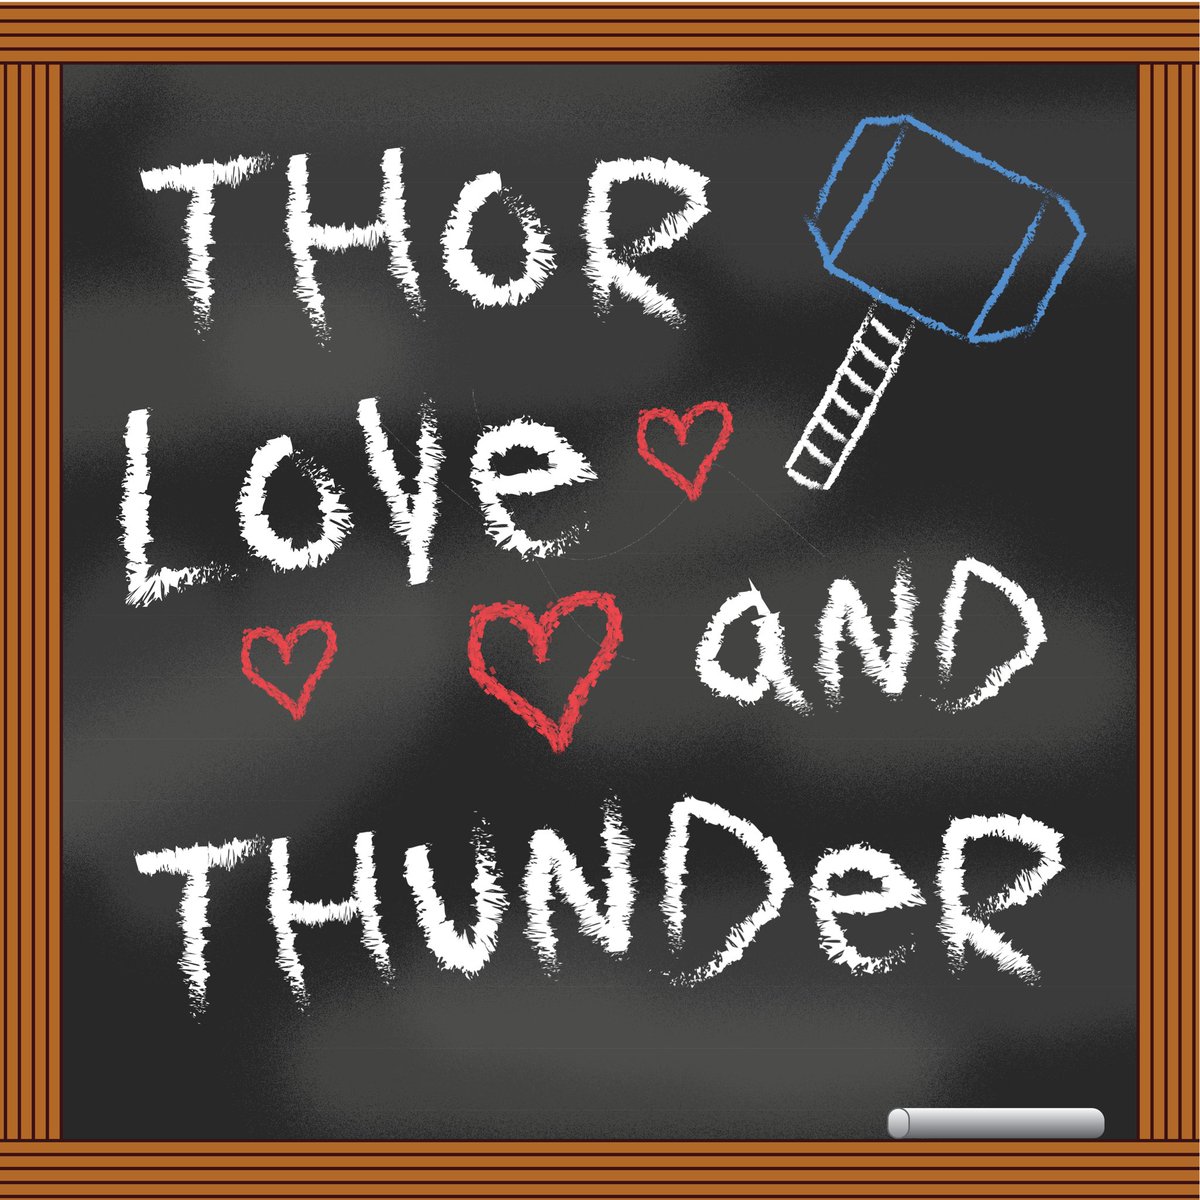 New episode on Thor: Love and Thunder is out! For the first time ever the three of us agree on a movie being bad. Also listen for that announcement we've been teasing for months now!!!
Apple: https://t.co/kIHyY6s0R4
Spotify: https://t.co/JVD5mkheOK https://t.co/gOyMtNaQNc